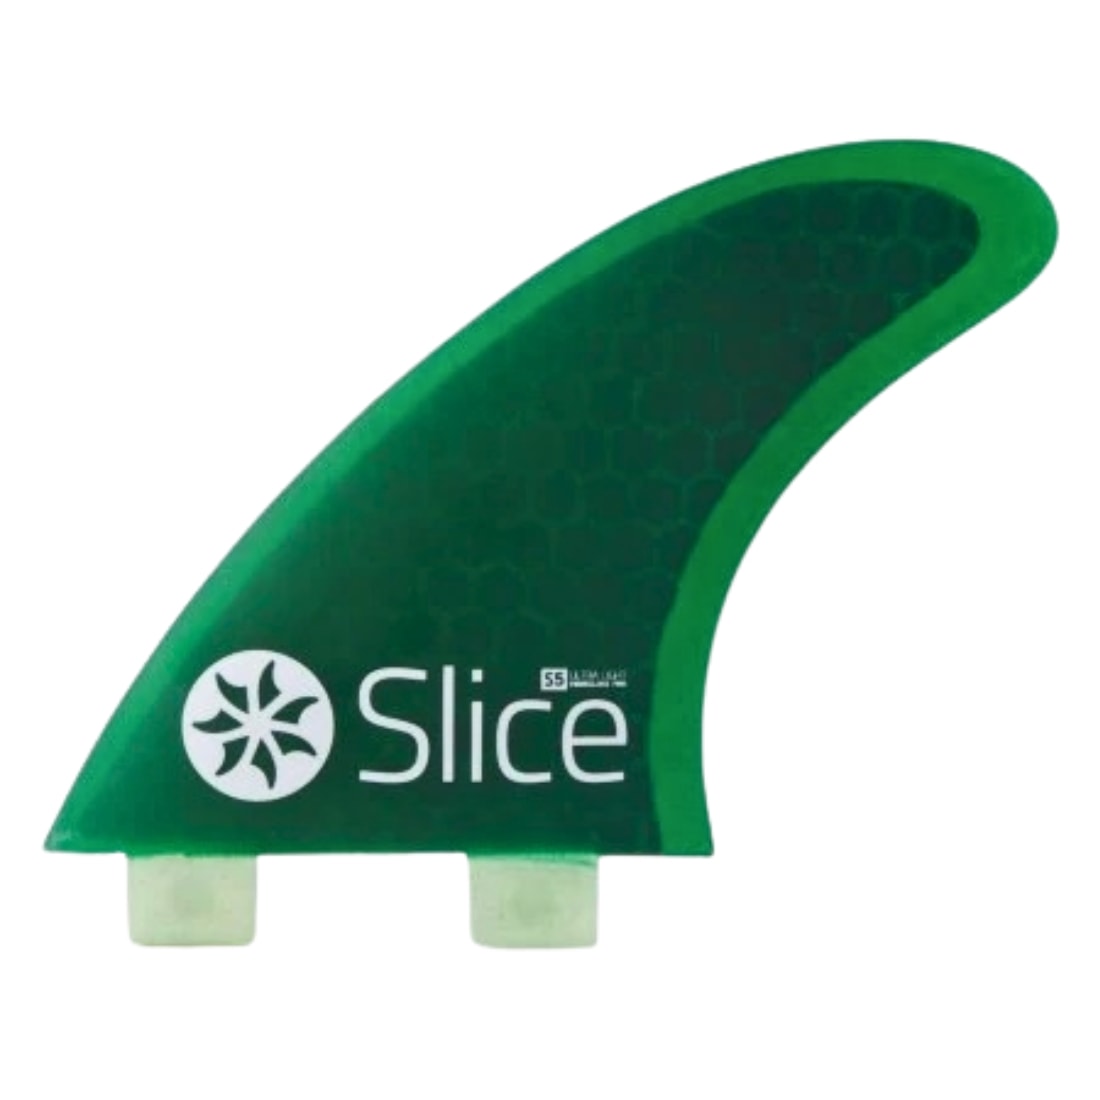 Northcore Slice Ultralight Hex Core S3 FCS Compatible Surfboard Fins - Green - FCS 1 Fins by Northcore Small Fins